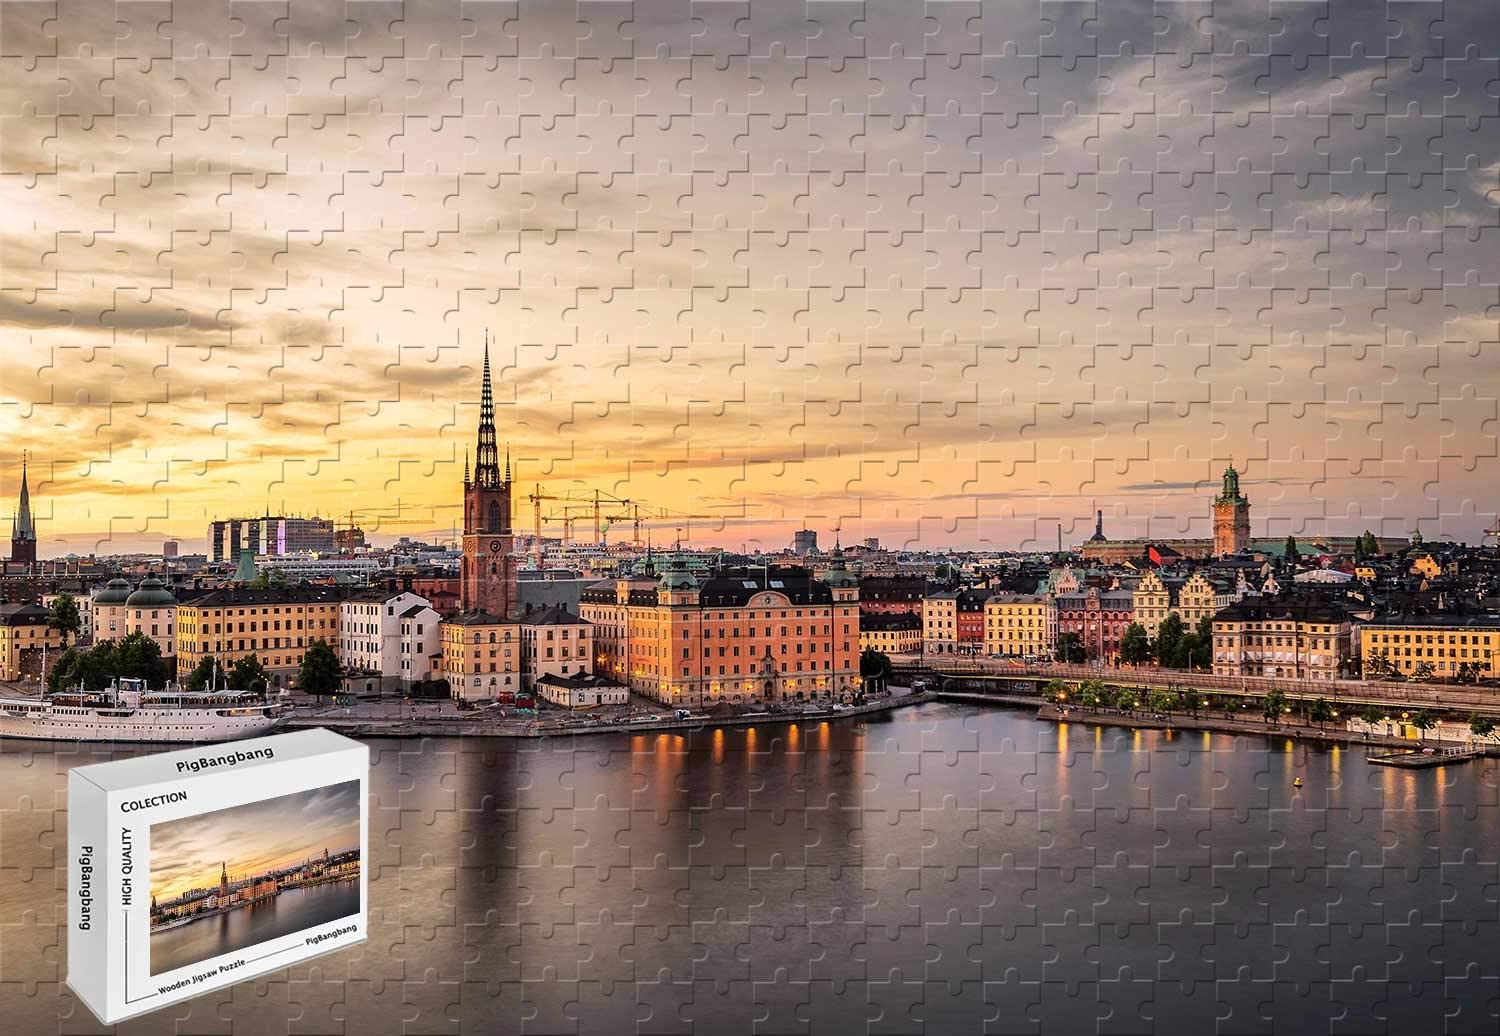 500 Piece Jigsaw Puzzle – Gamla Stan at Dusk Stockholm Sweden Wooden Mural Home Decoration in a Box Famous Paintings 20.6 X 15.1 Inch